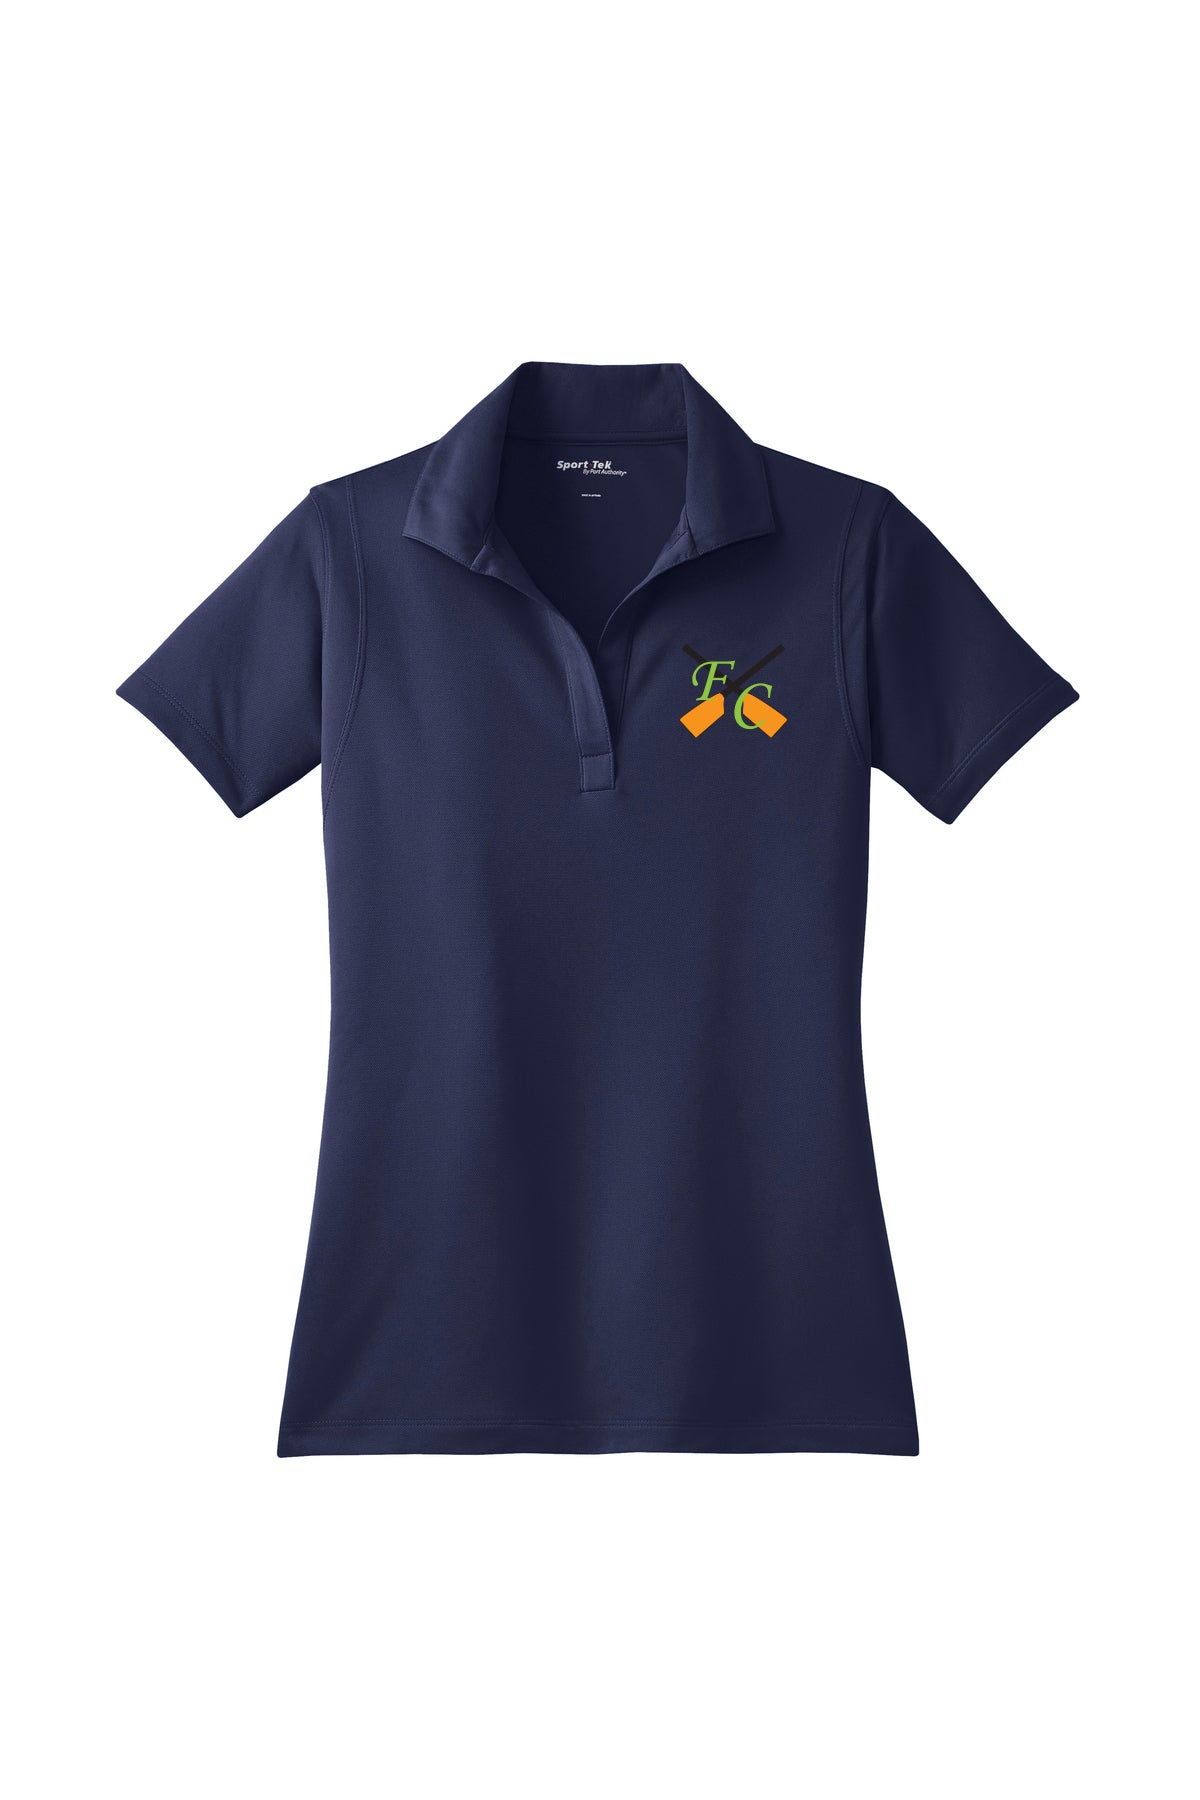 FCRA Embroidered Performance Ladies Polo